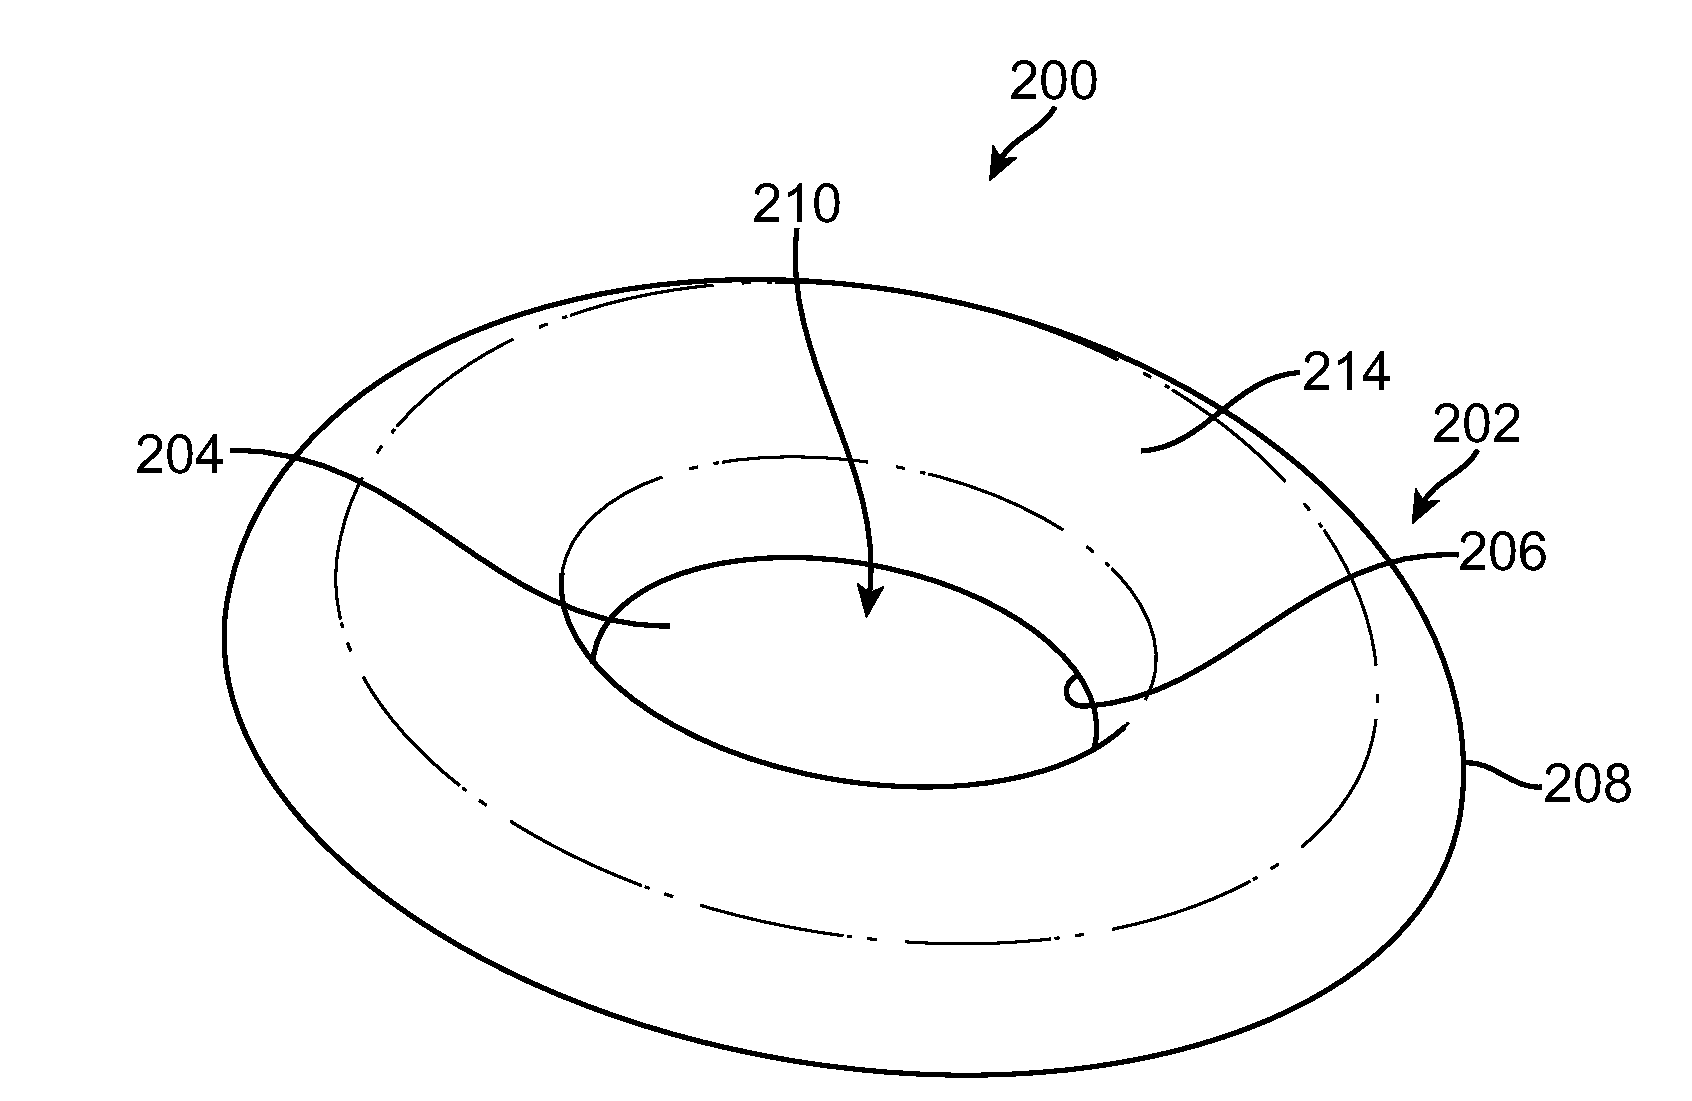 Burr hole sealing device for preventing brain shift